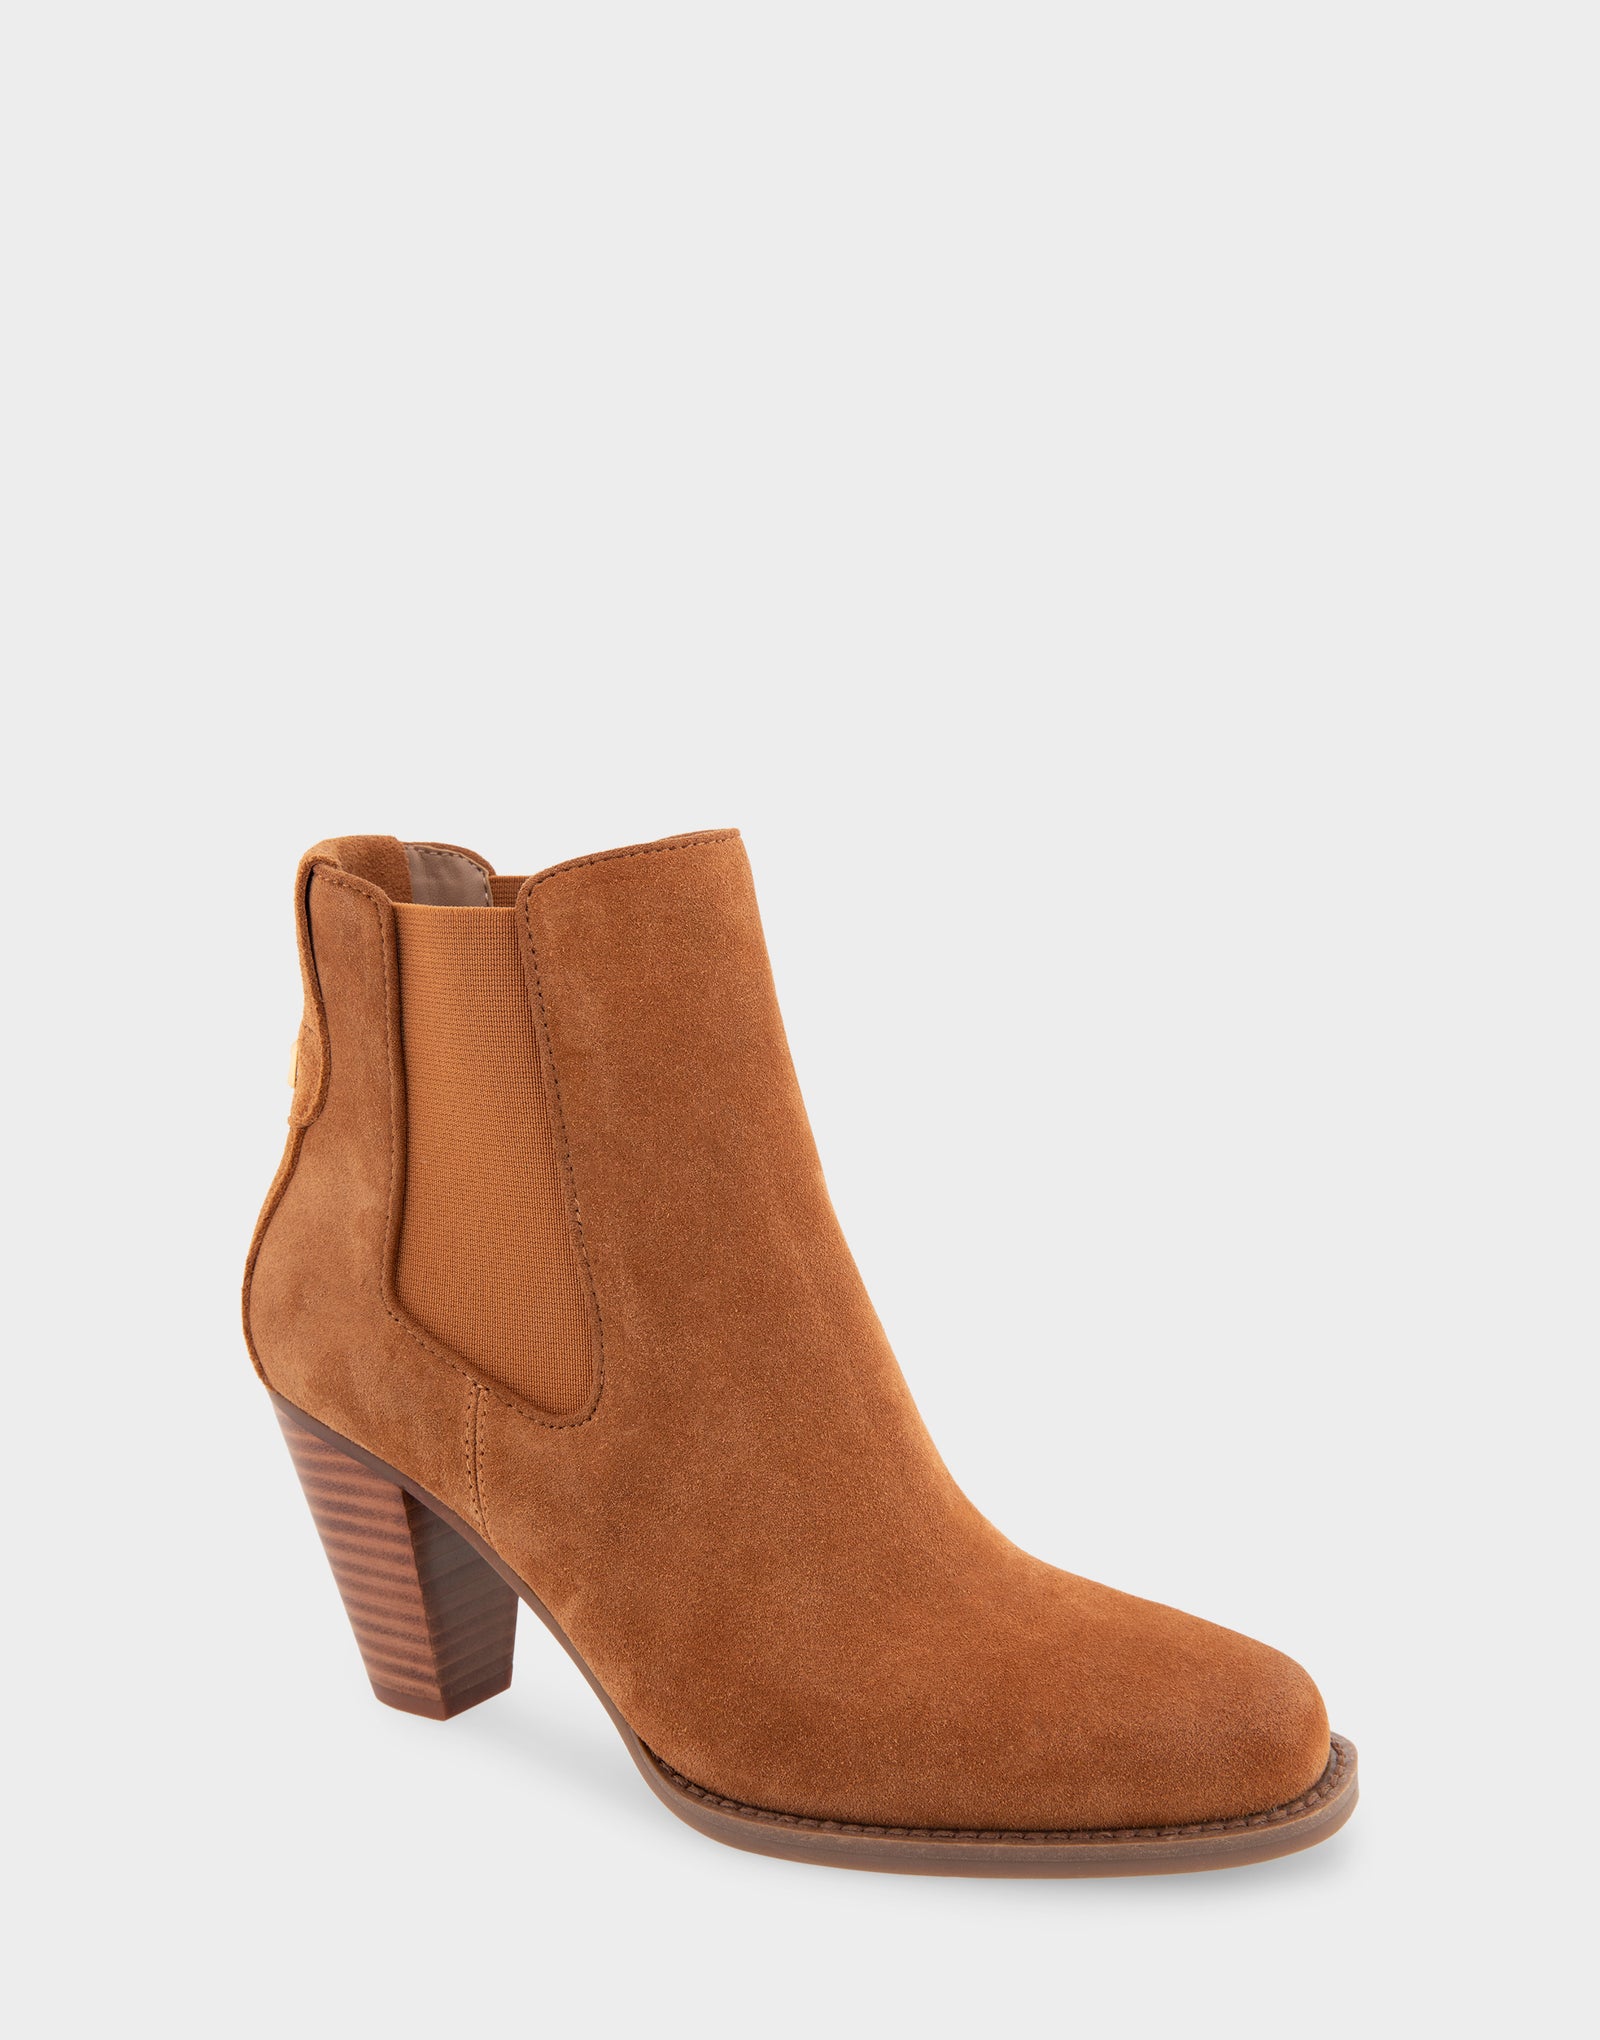 Women's Heeled Ankle Boot in Tan 